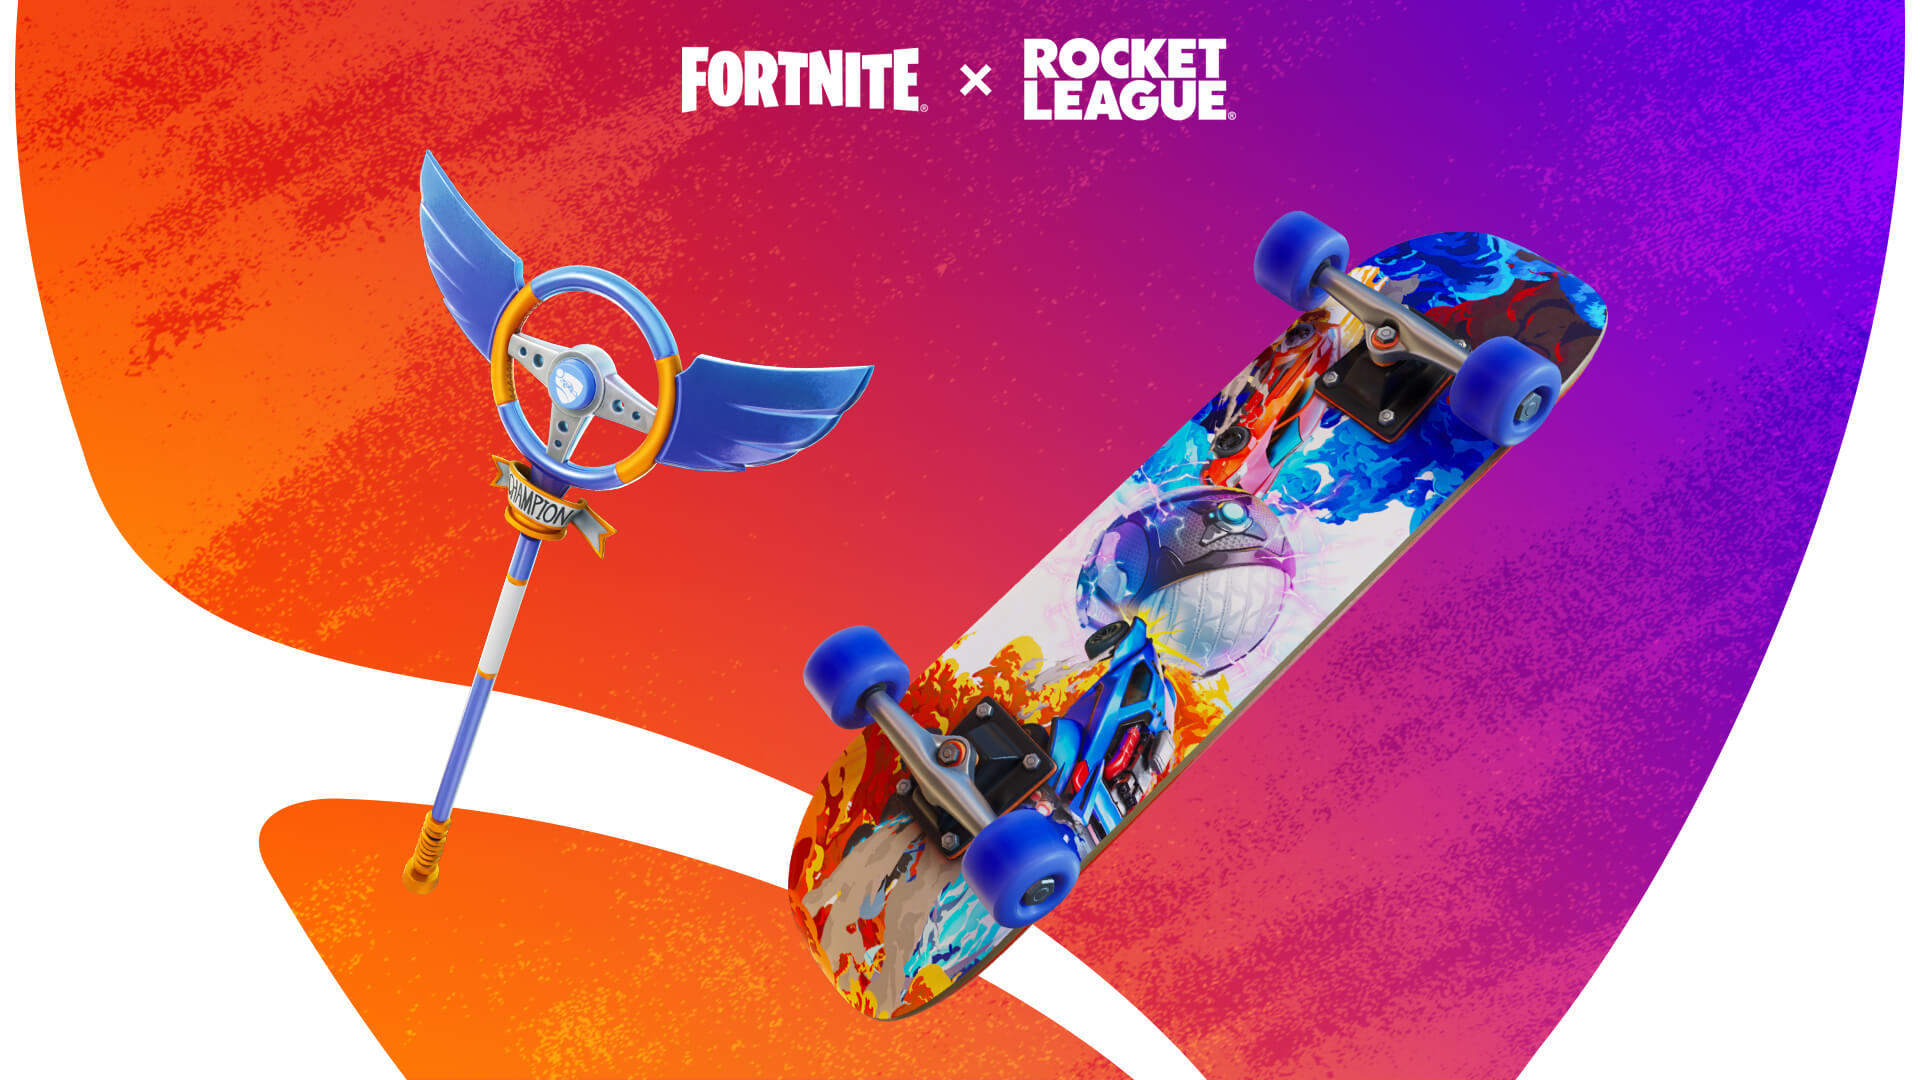 FORTNITE X ROCKET LEAGUE: The Collaboration brings new cars to both games in “HIGH OCTANE” celebration